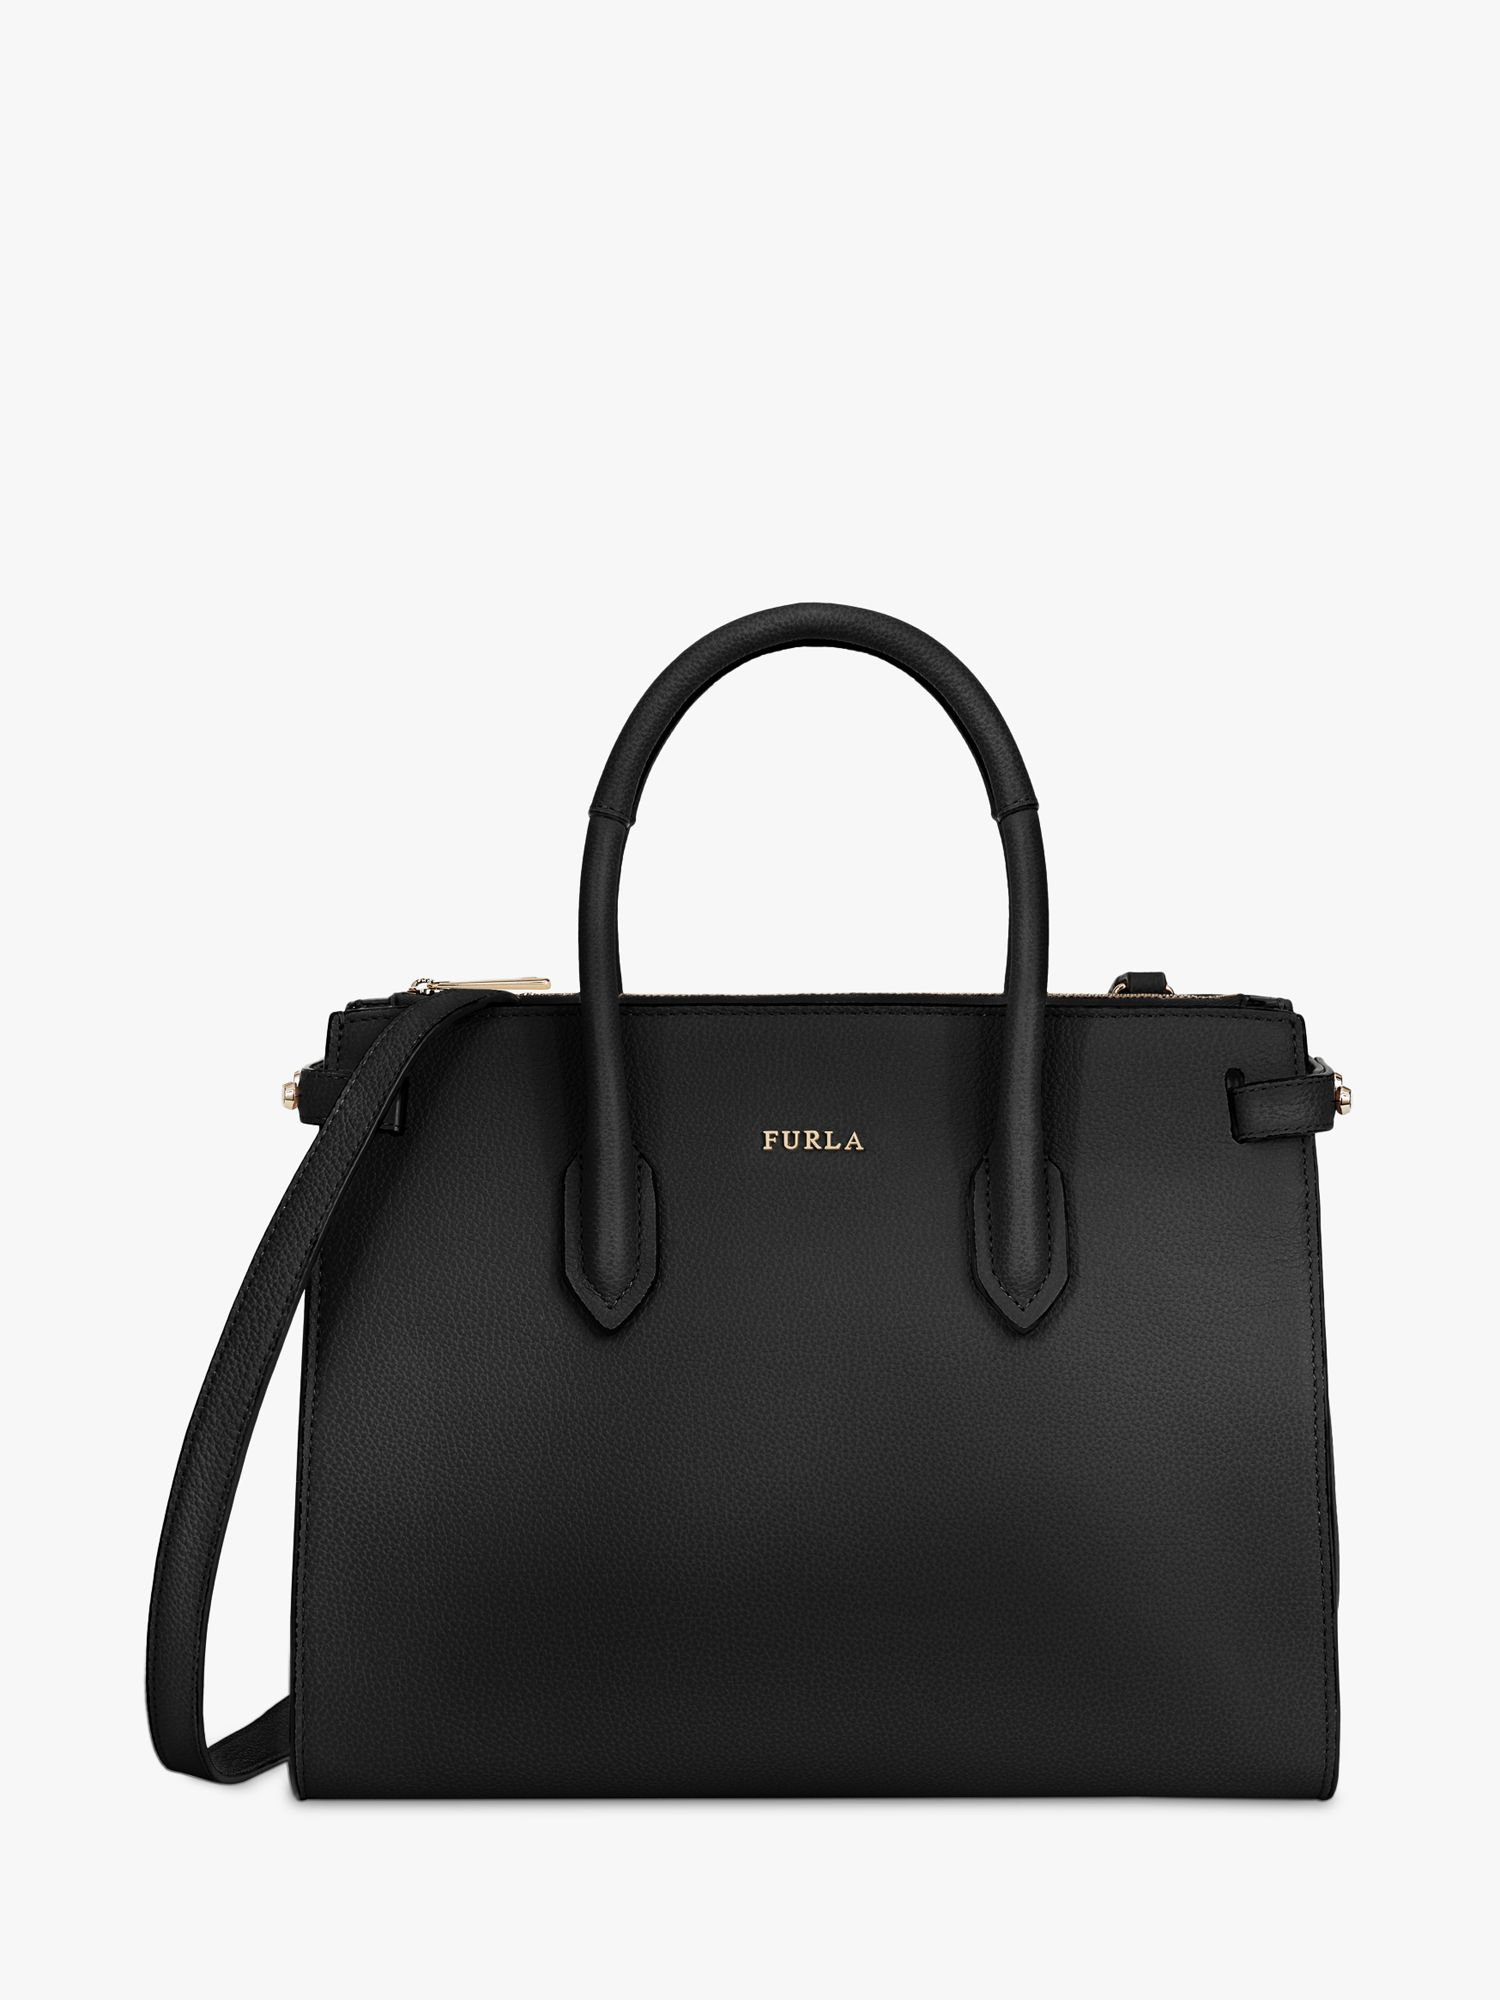 Furla Pin Small Leather East West Tote Bag